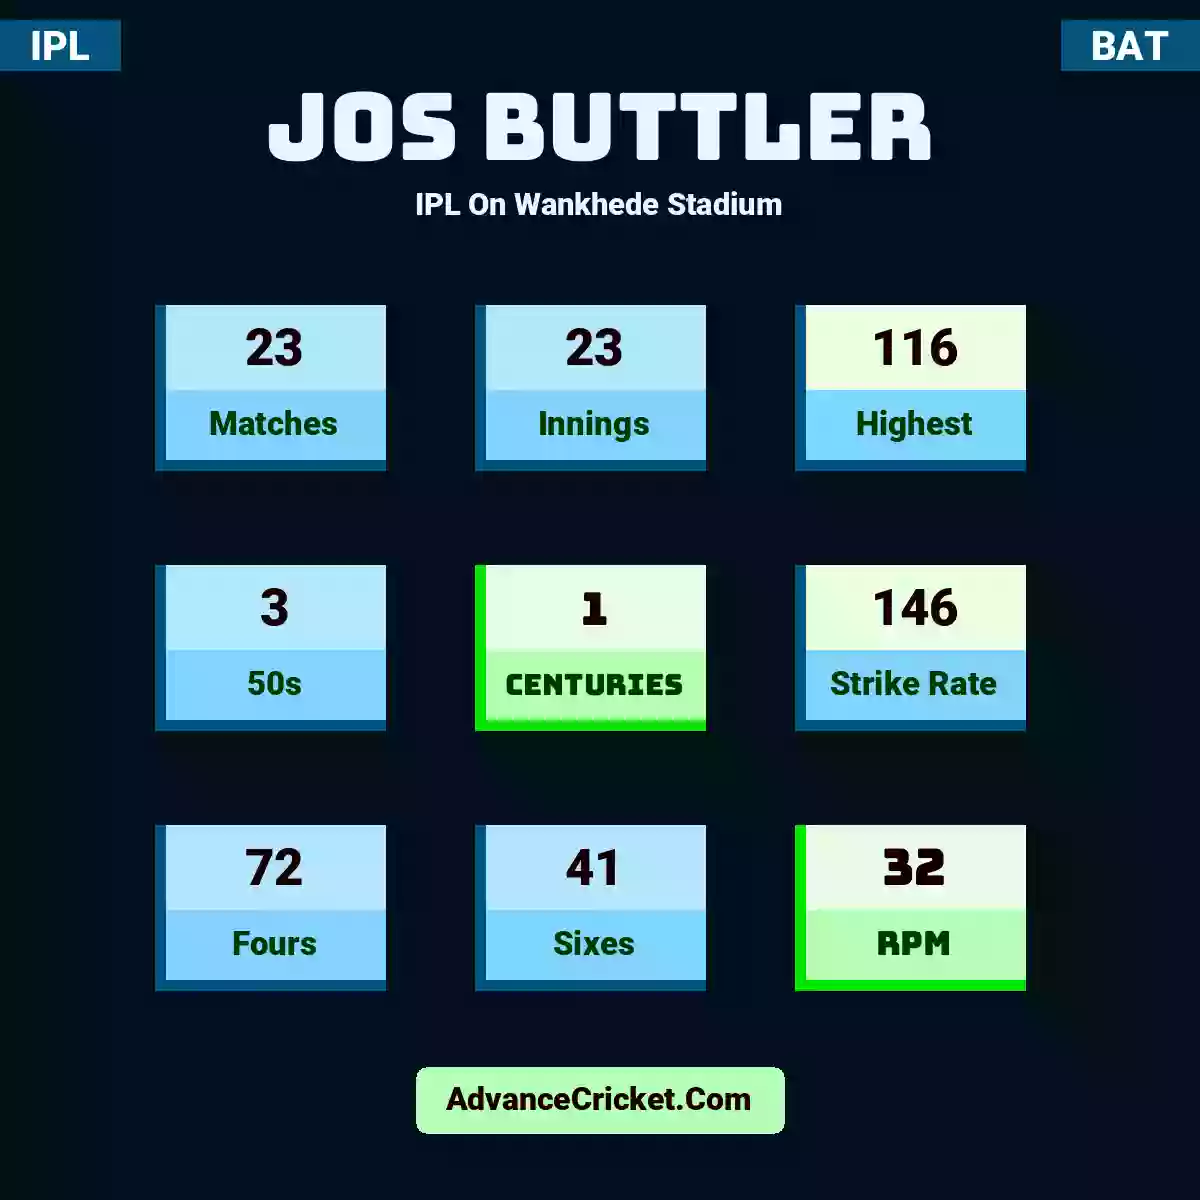 Jos Buttler IPL  On Wankhede Stadium, Jos Buttler played 23 matches, scored 116 runs as highest, 3 half-centuries, and 1 centuries, with a strike rate of 146. J.Buttler hit 72 fours and 41 sixes, with an RPM of 32.